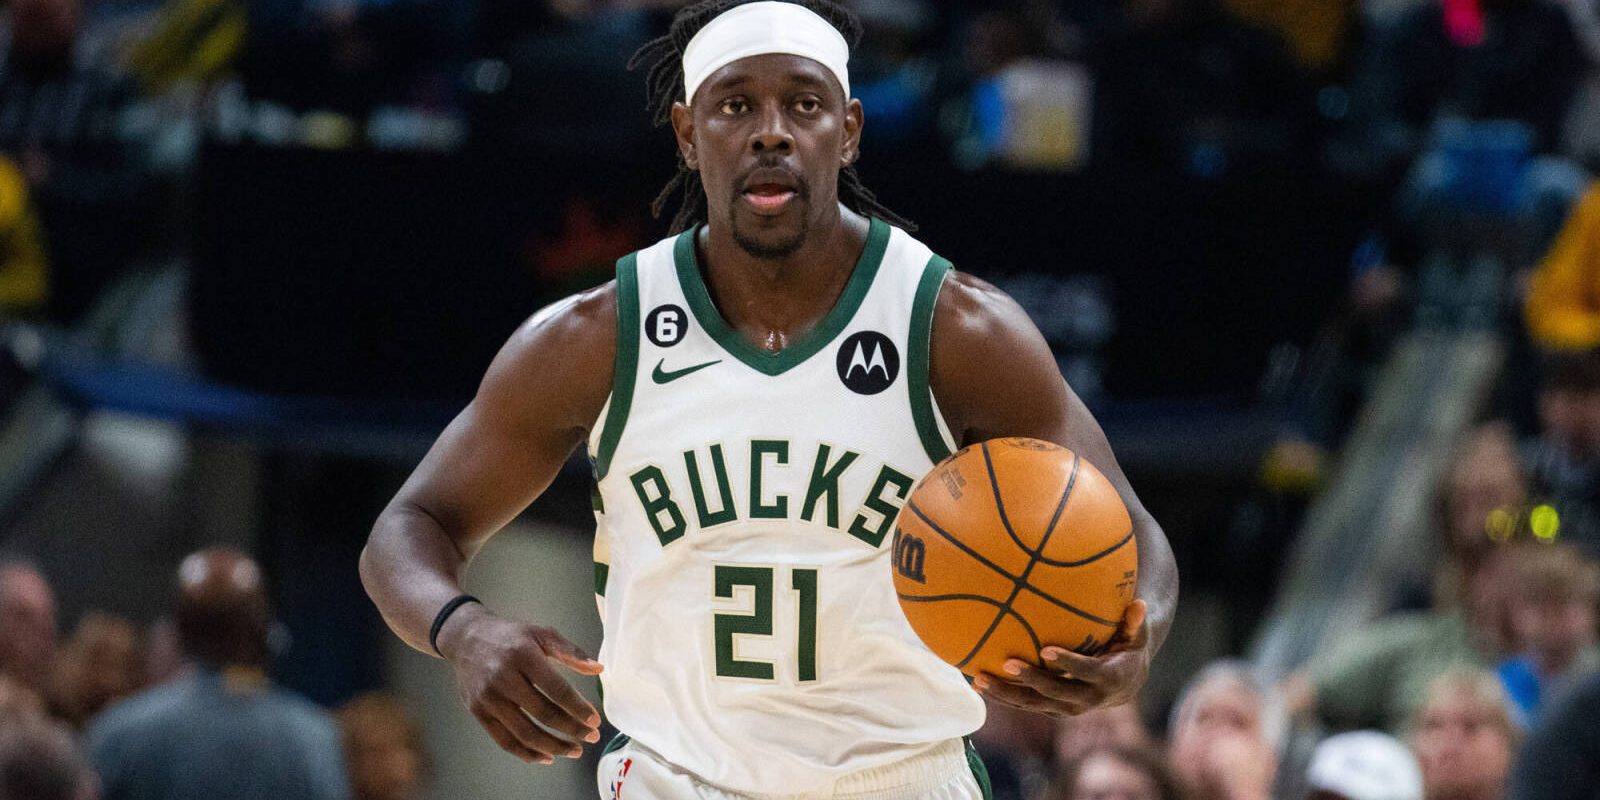 Mar 29, 2023; Indianapolis, Indiana, USA; Milwaukee Bucks guard Jrue Holiday (21) dribbles the ball in the first quarter against the Indiana Pacers at Gainbridge Fieldhouse. Mandatory Credit: Trevor Ruszkowski-USA TODAY Sports